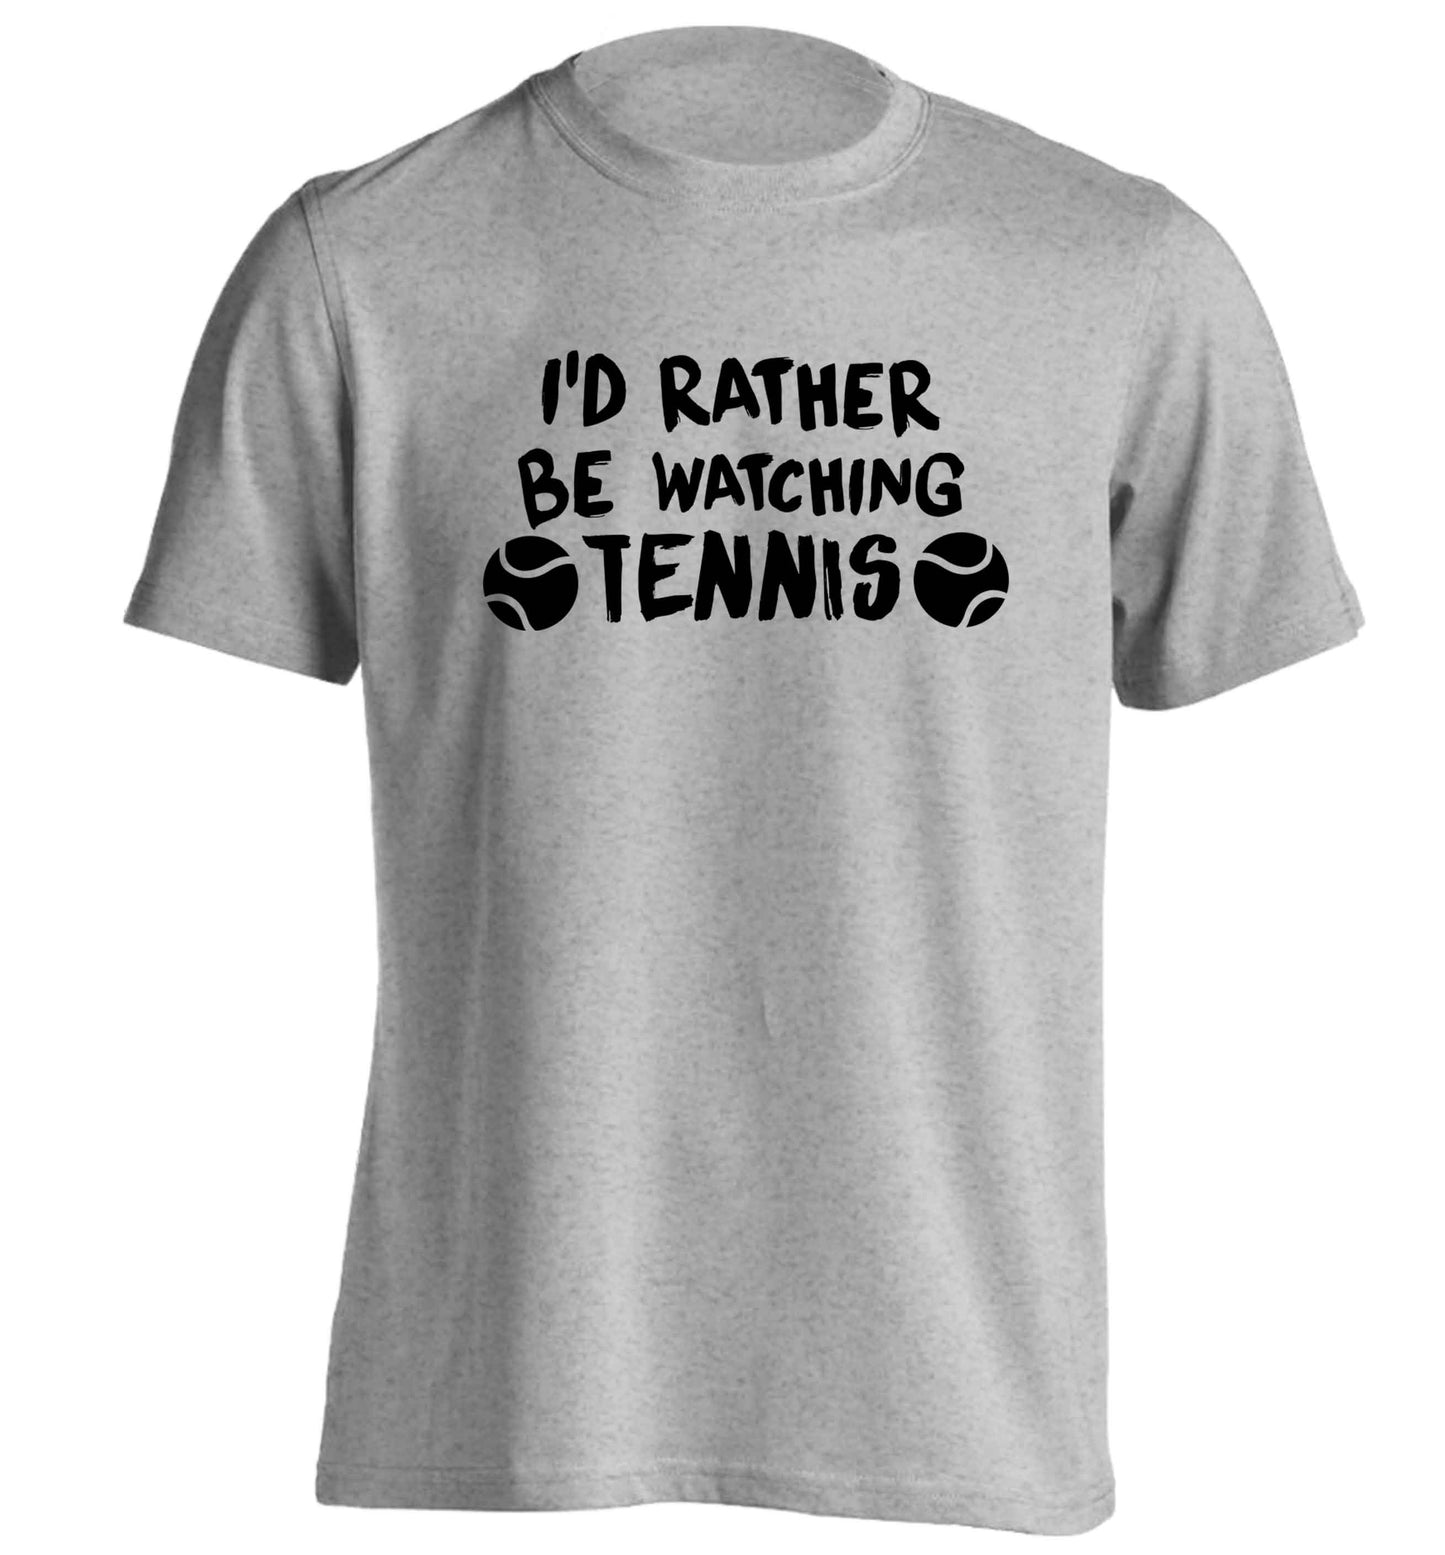 I'd rather be watching the tennis adults unisex grey Tshirt 2XL